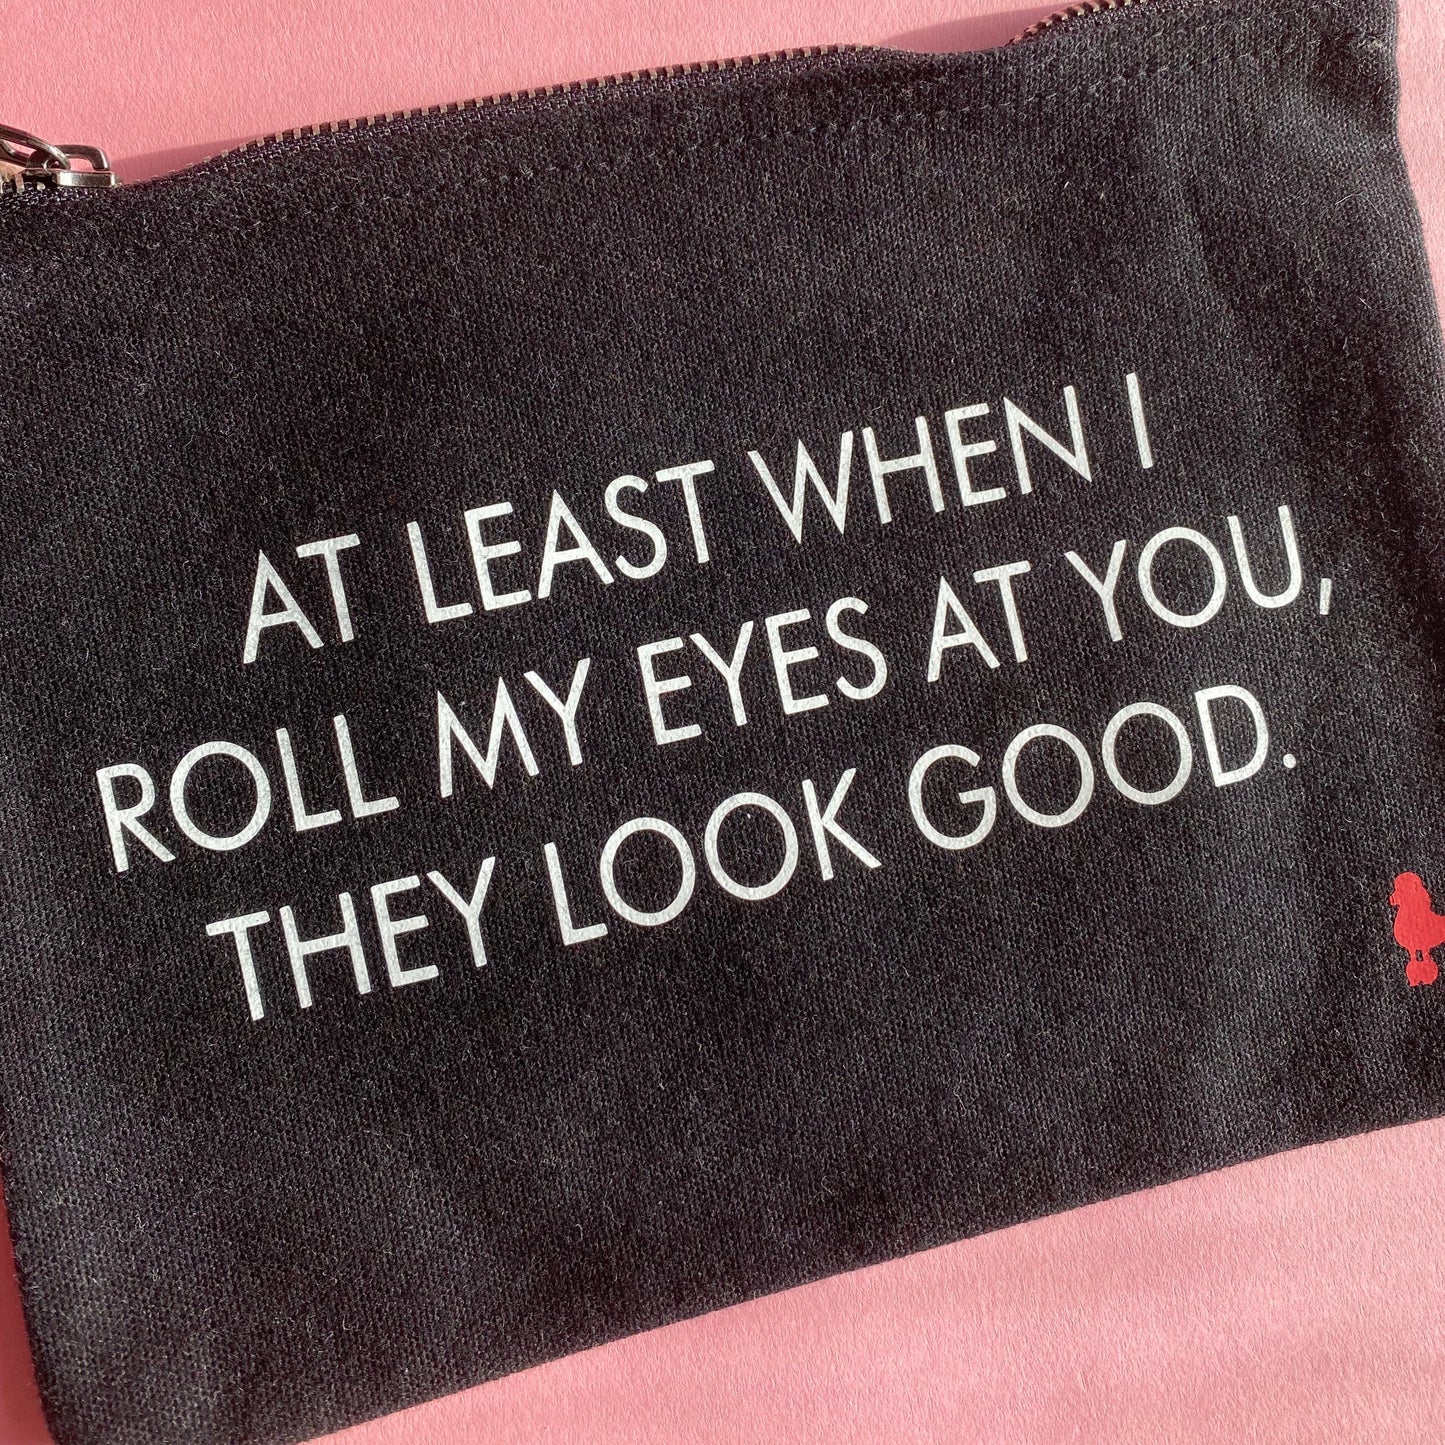 At Least When I Roll My Eyes At You - Black Medium Make Up Bag SALE